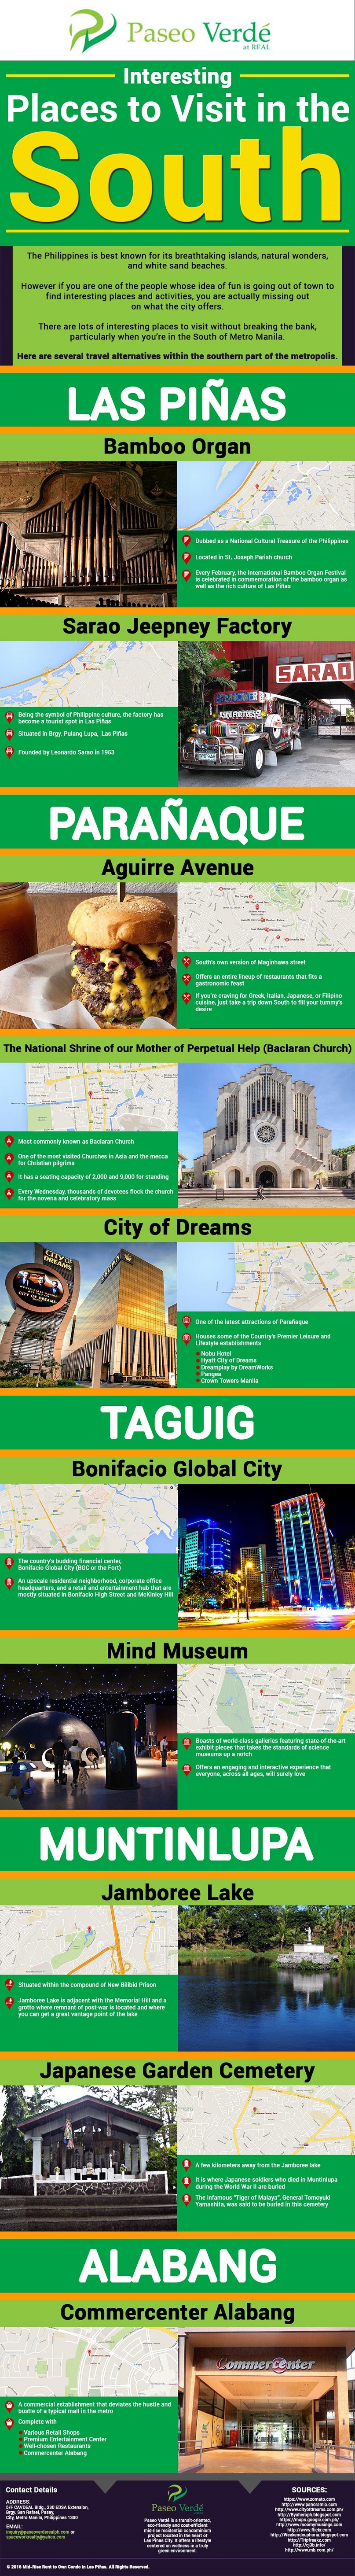 Interesting Places To Visit in the South Philippines infographic